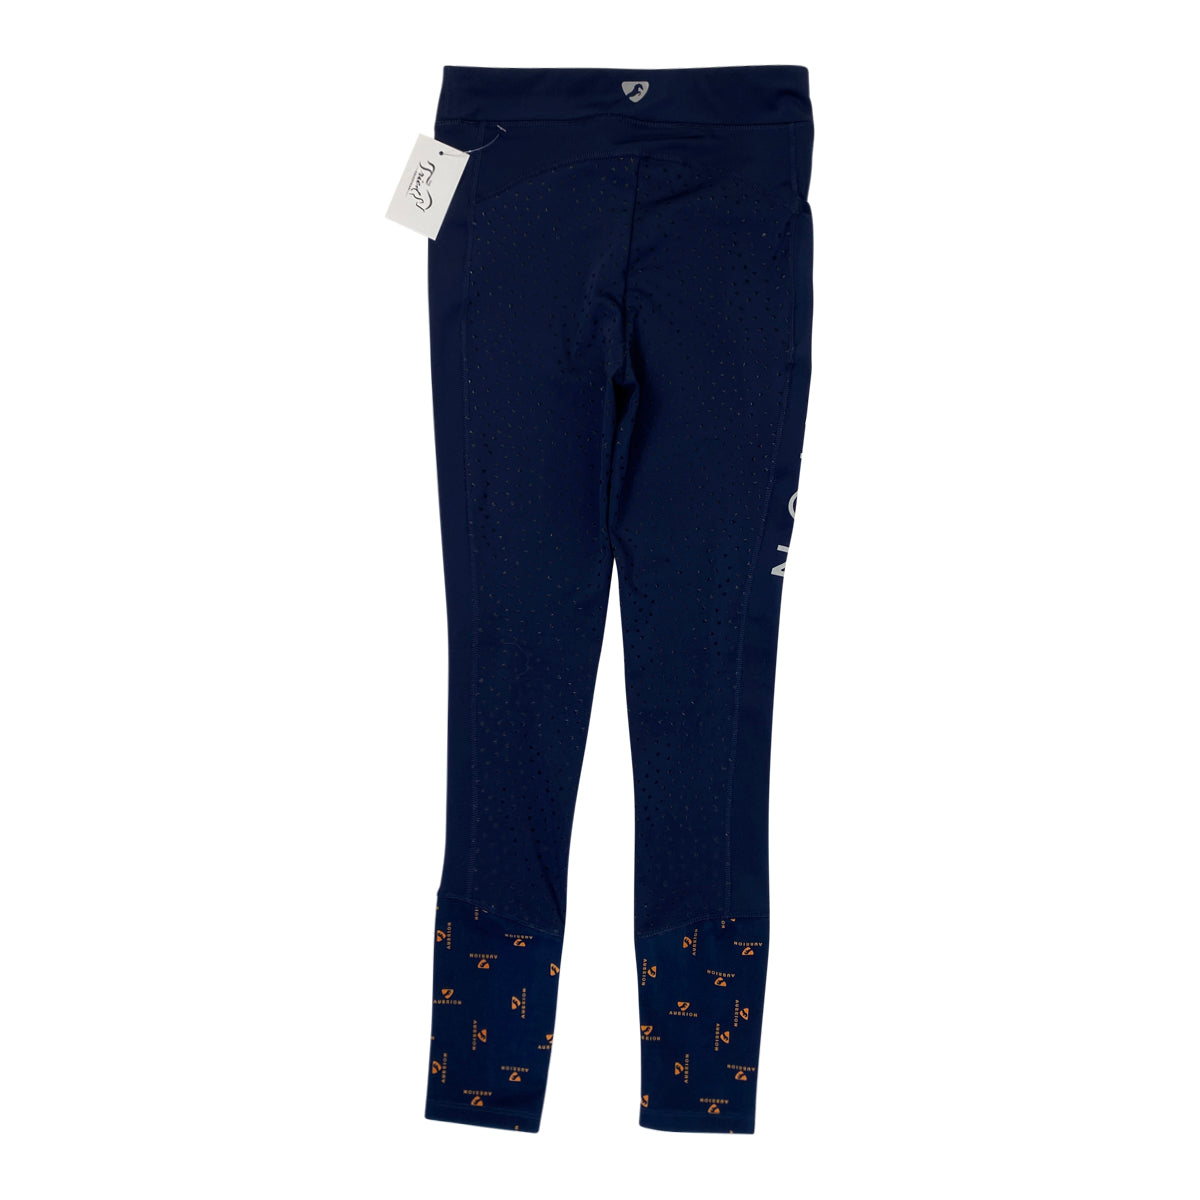 Shires Aubrion 'Stanmore' Tights in Navy